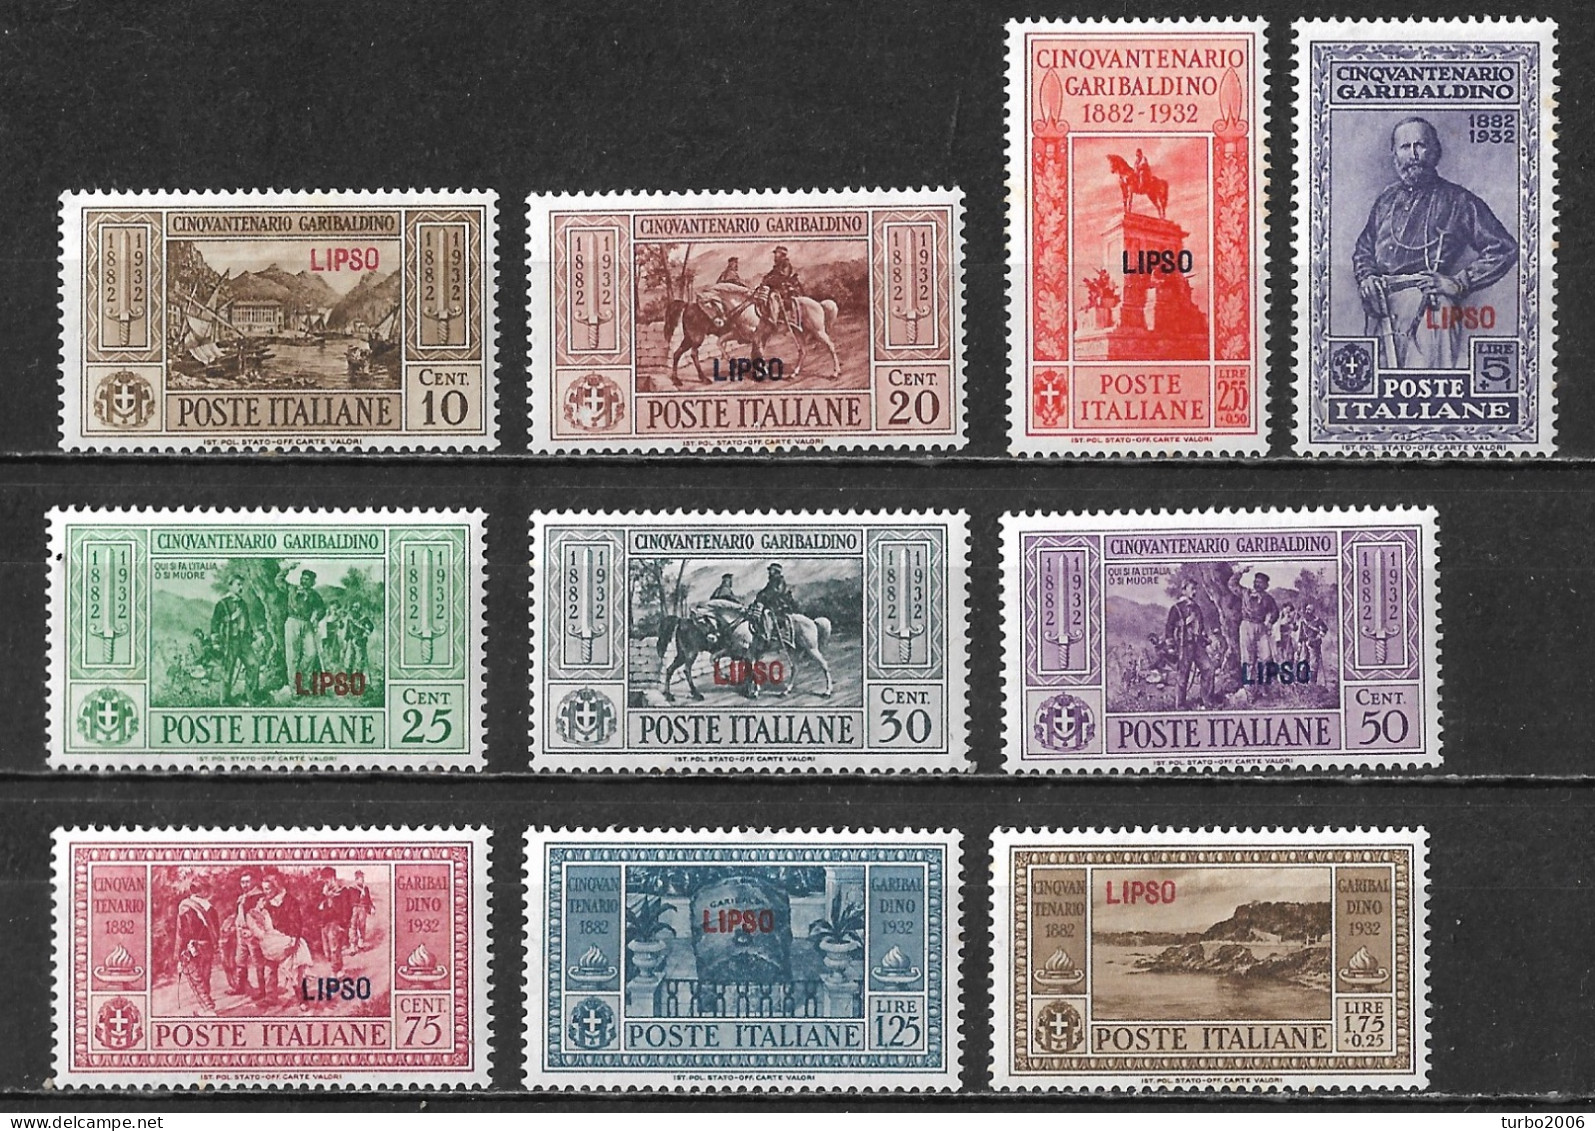 DODECANESE 1932 Stamps Of Italy Garibaldi Set With Overprint LIPSO Complete MH Set Vl. 17 / 26 - Dodecaneso